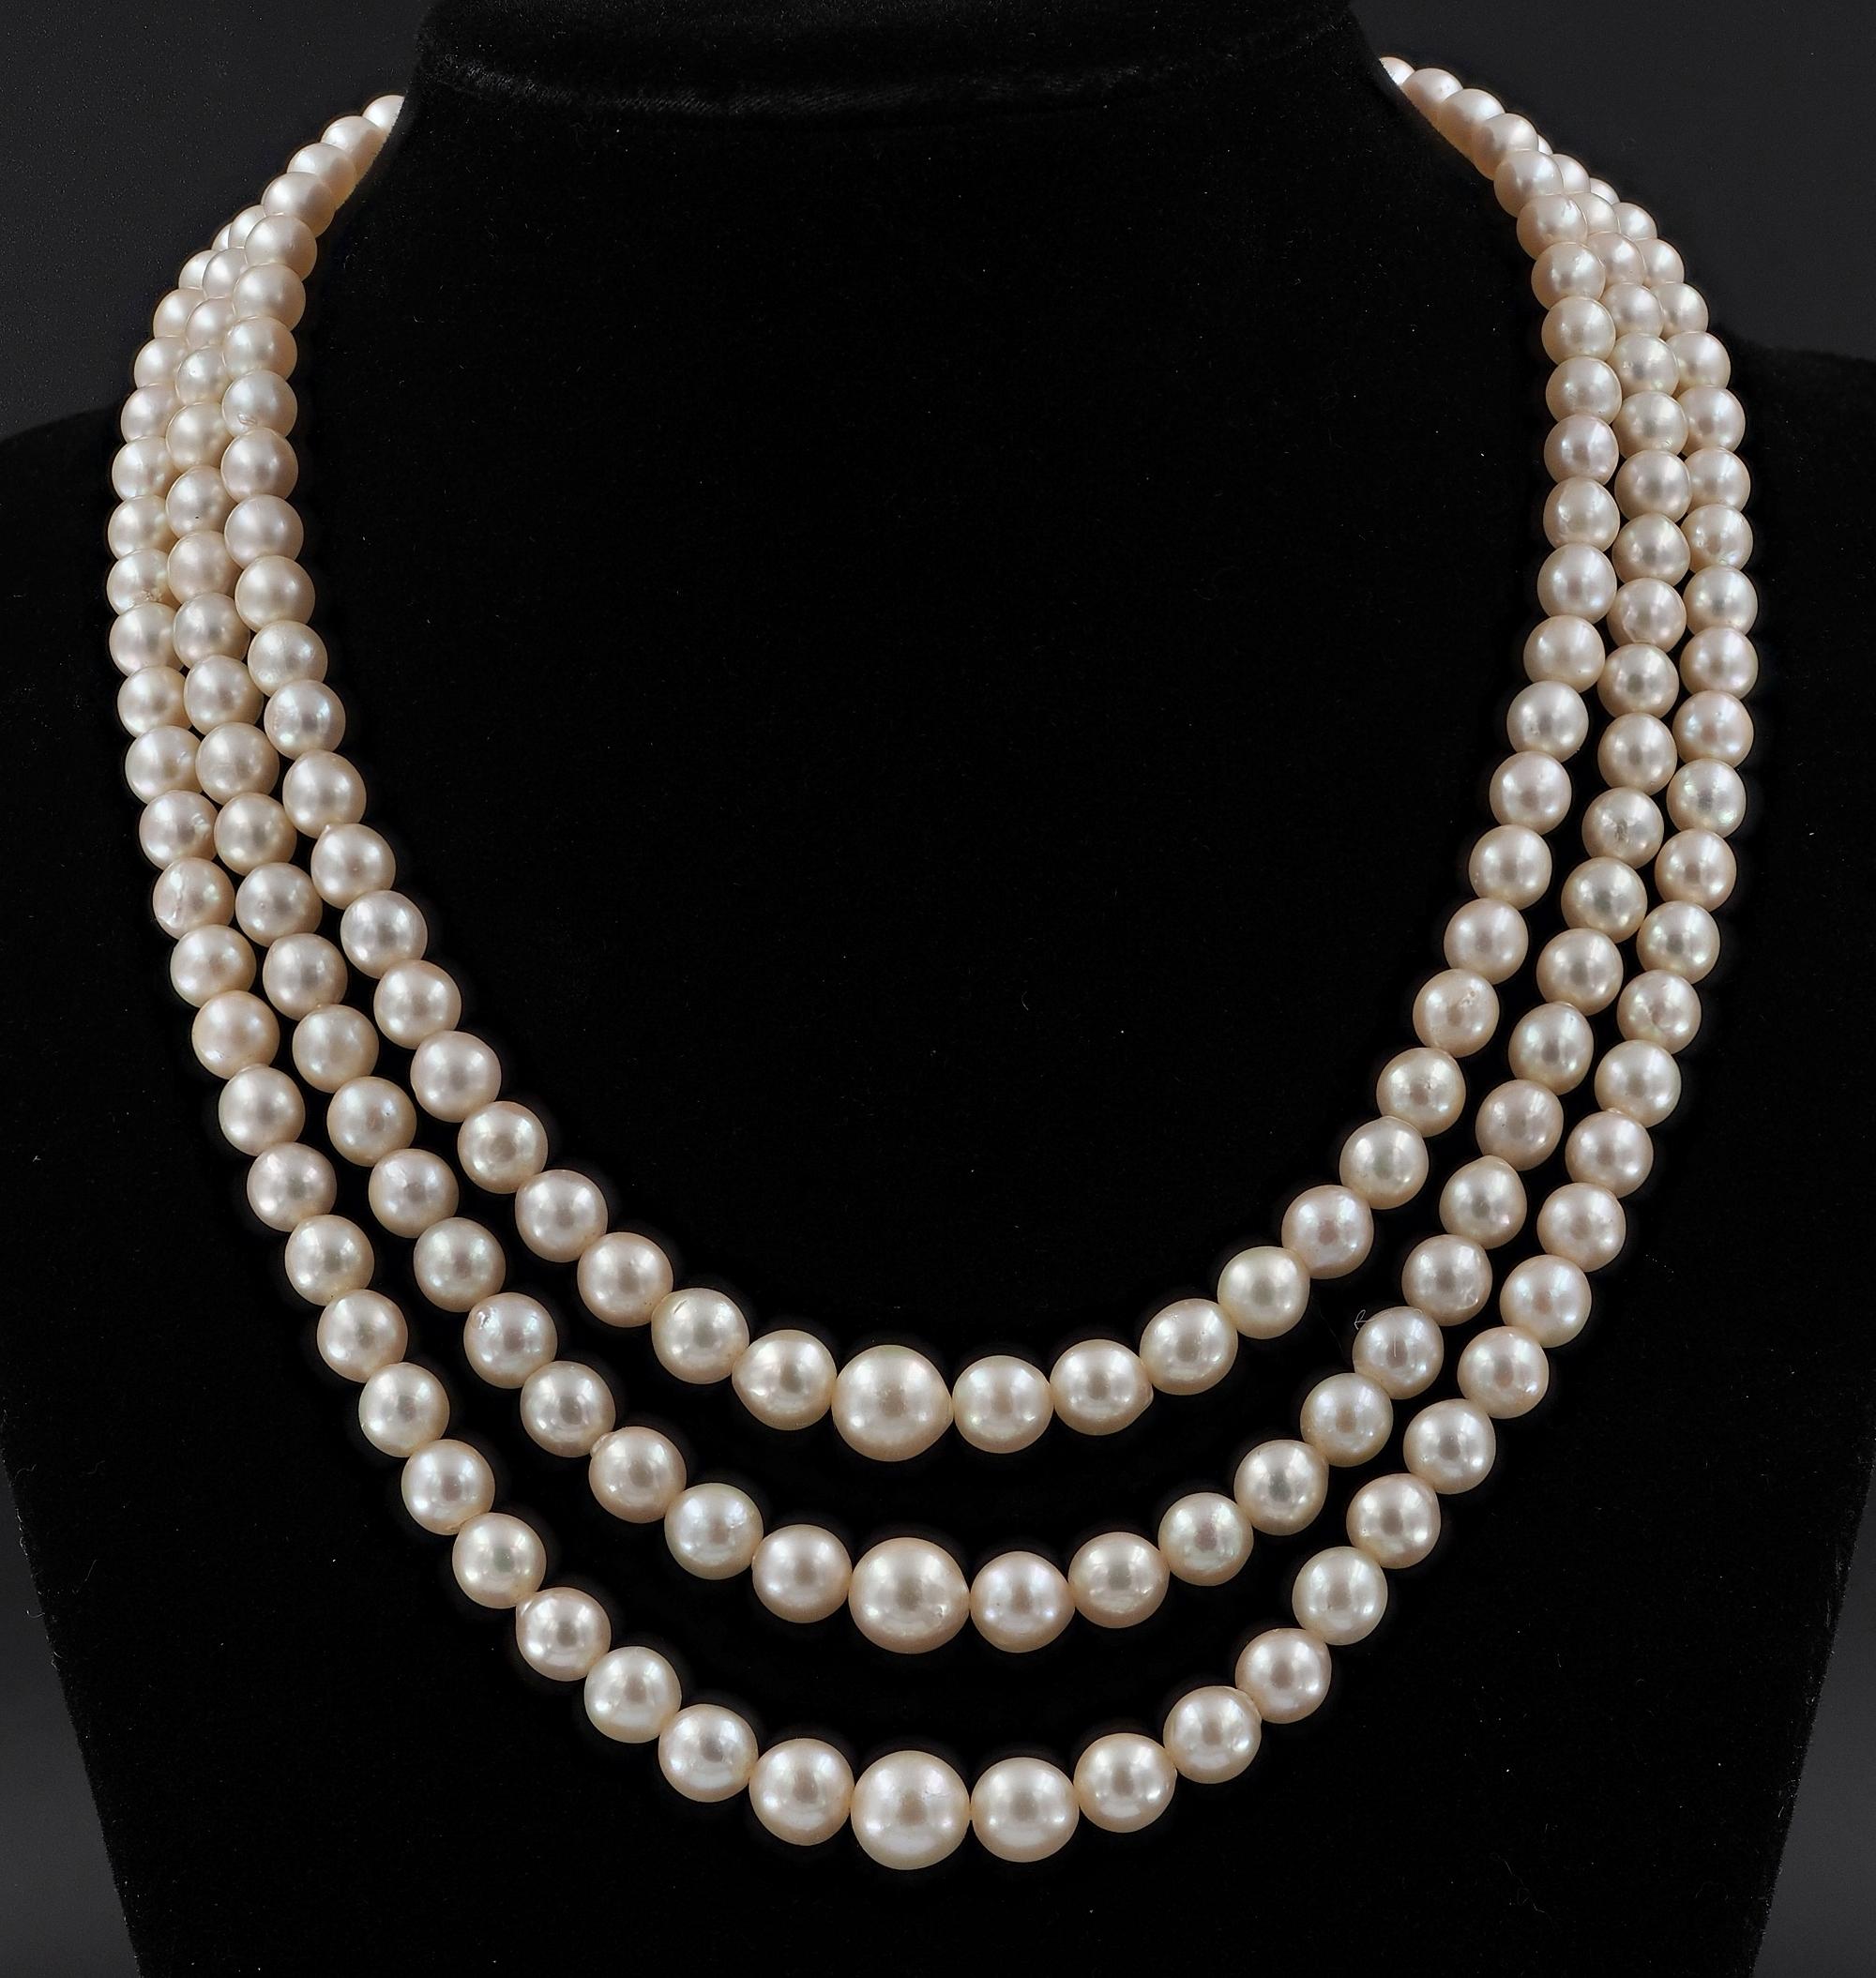 Heirloom Necklace
This super antique necklace is 1920 ca
Comprising three strands of antique cultured salt water Pearls graduating in sizes from 4.7 to 8.5 the biggest, pearls are subtle white cream and lustrous making an extraordinary classy